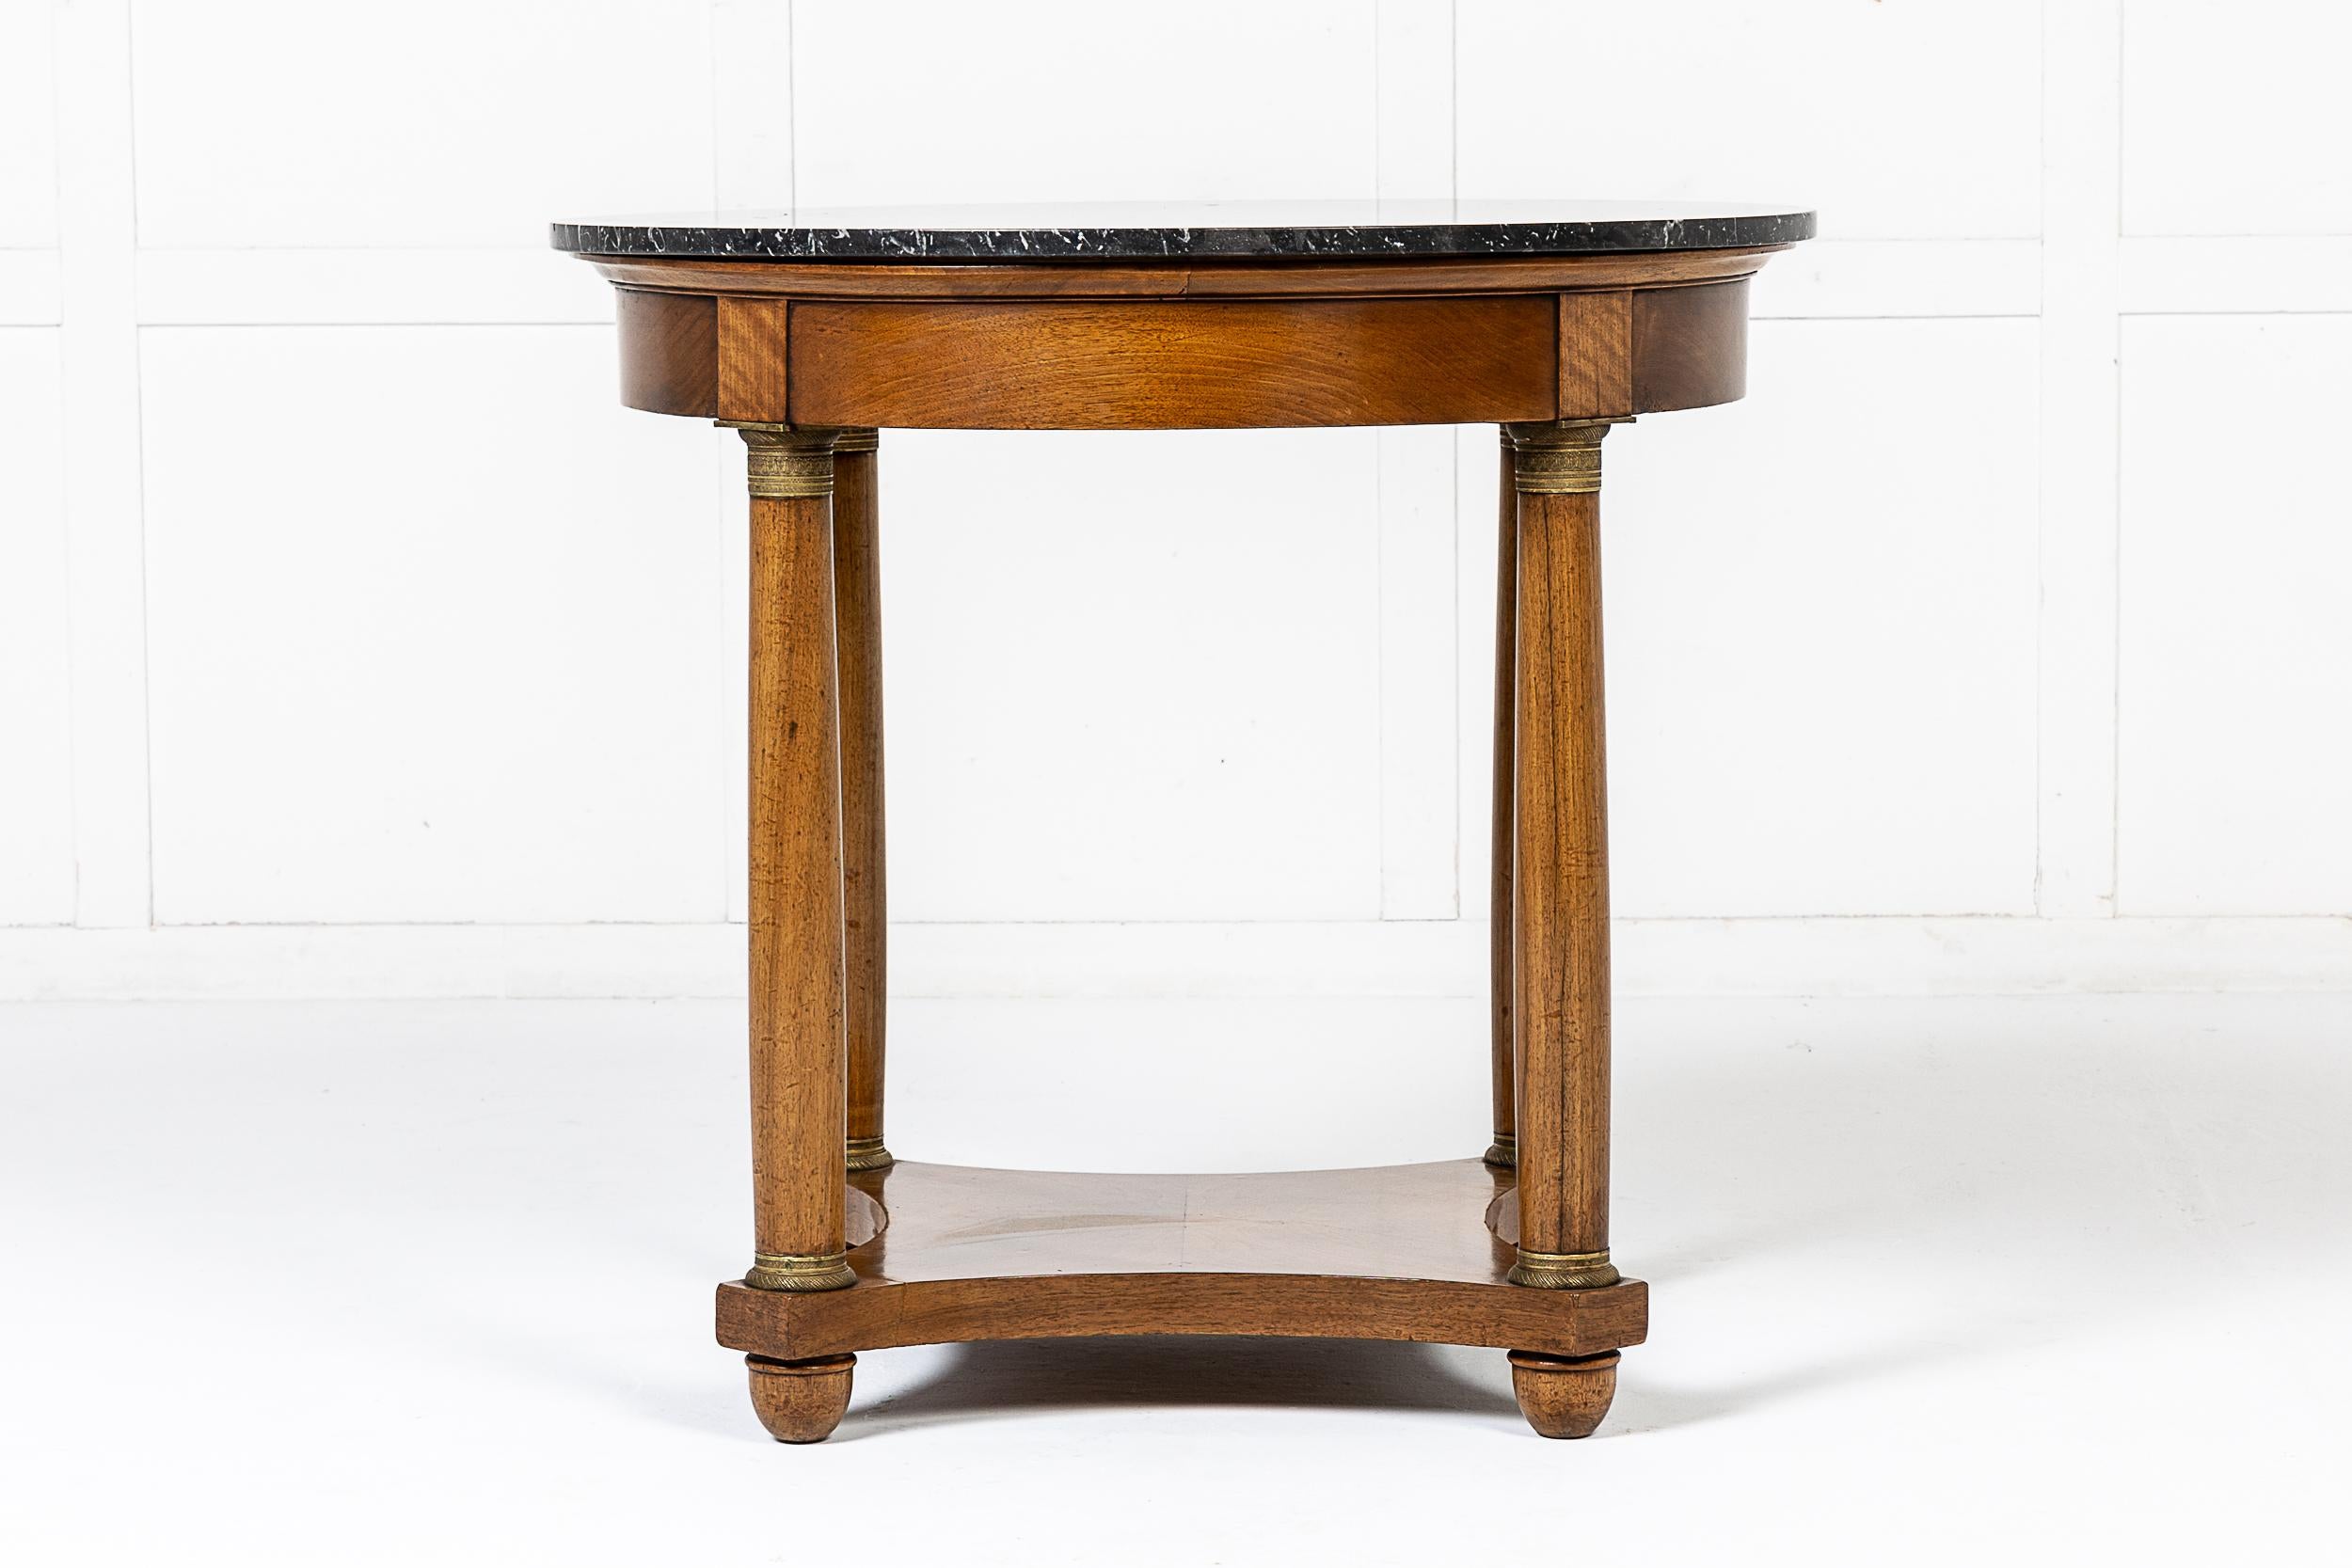 A Good Quality 19th Century French Walnut Guéridon with Original Marble Top and Ormolu Mounts.

The walnut of fine mellow colour. The legs joined by a low stretcher or undertier and each leg with a fine ormolu mount to the top and base. The original